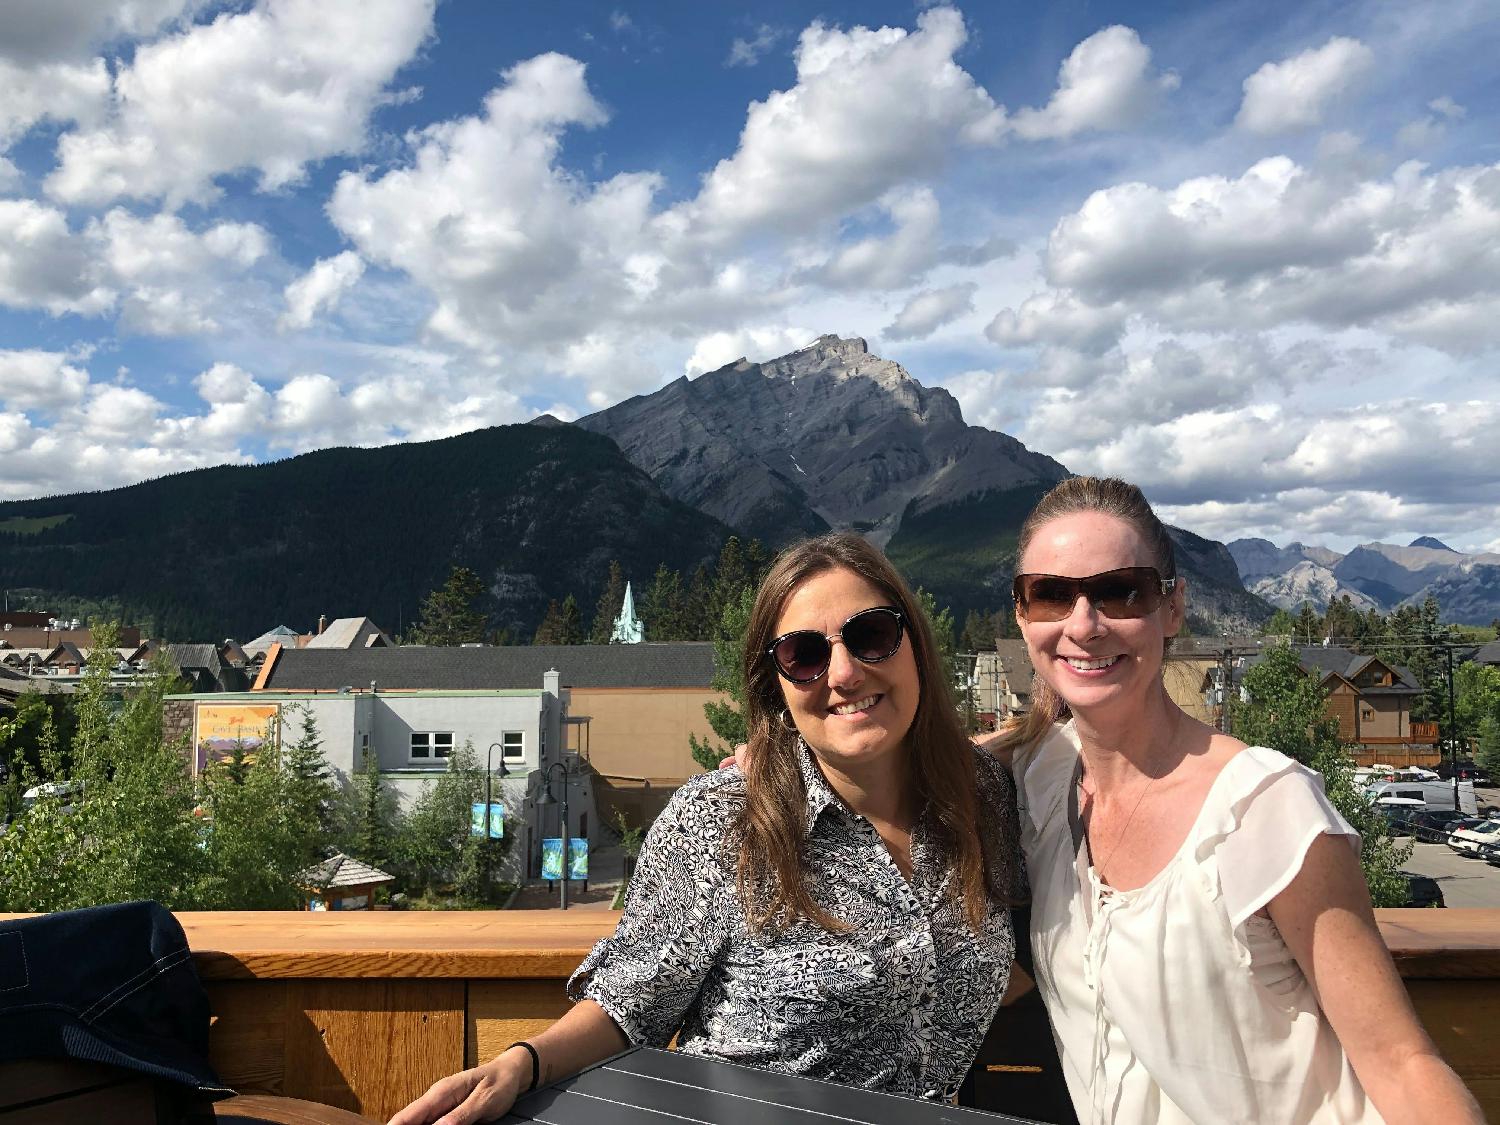 Close friends as well as co-workers.  Vacationing together in Canada.